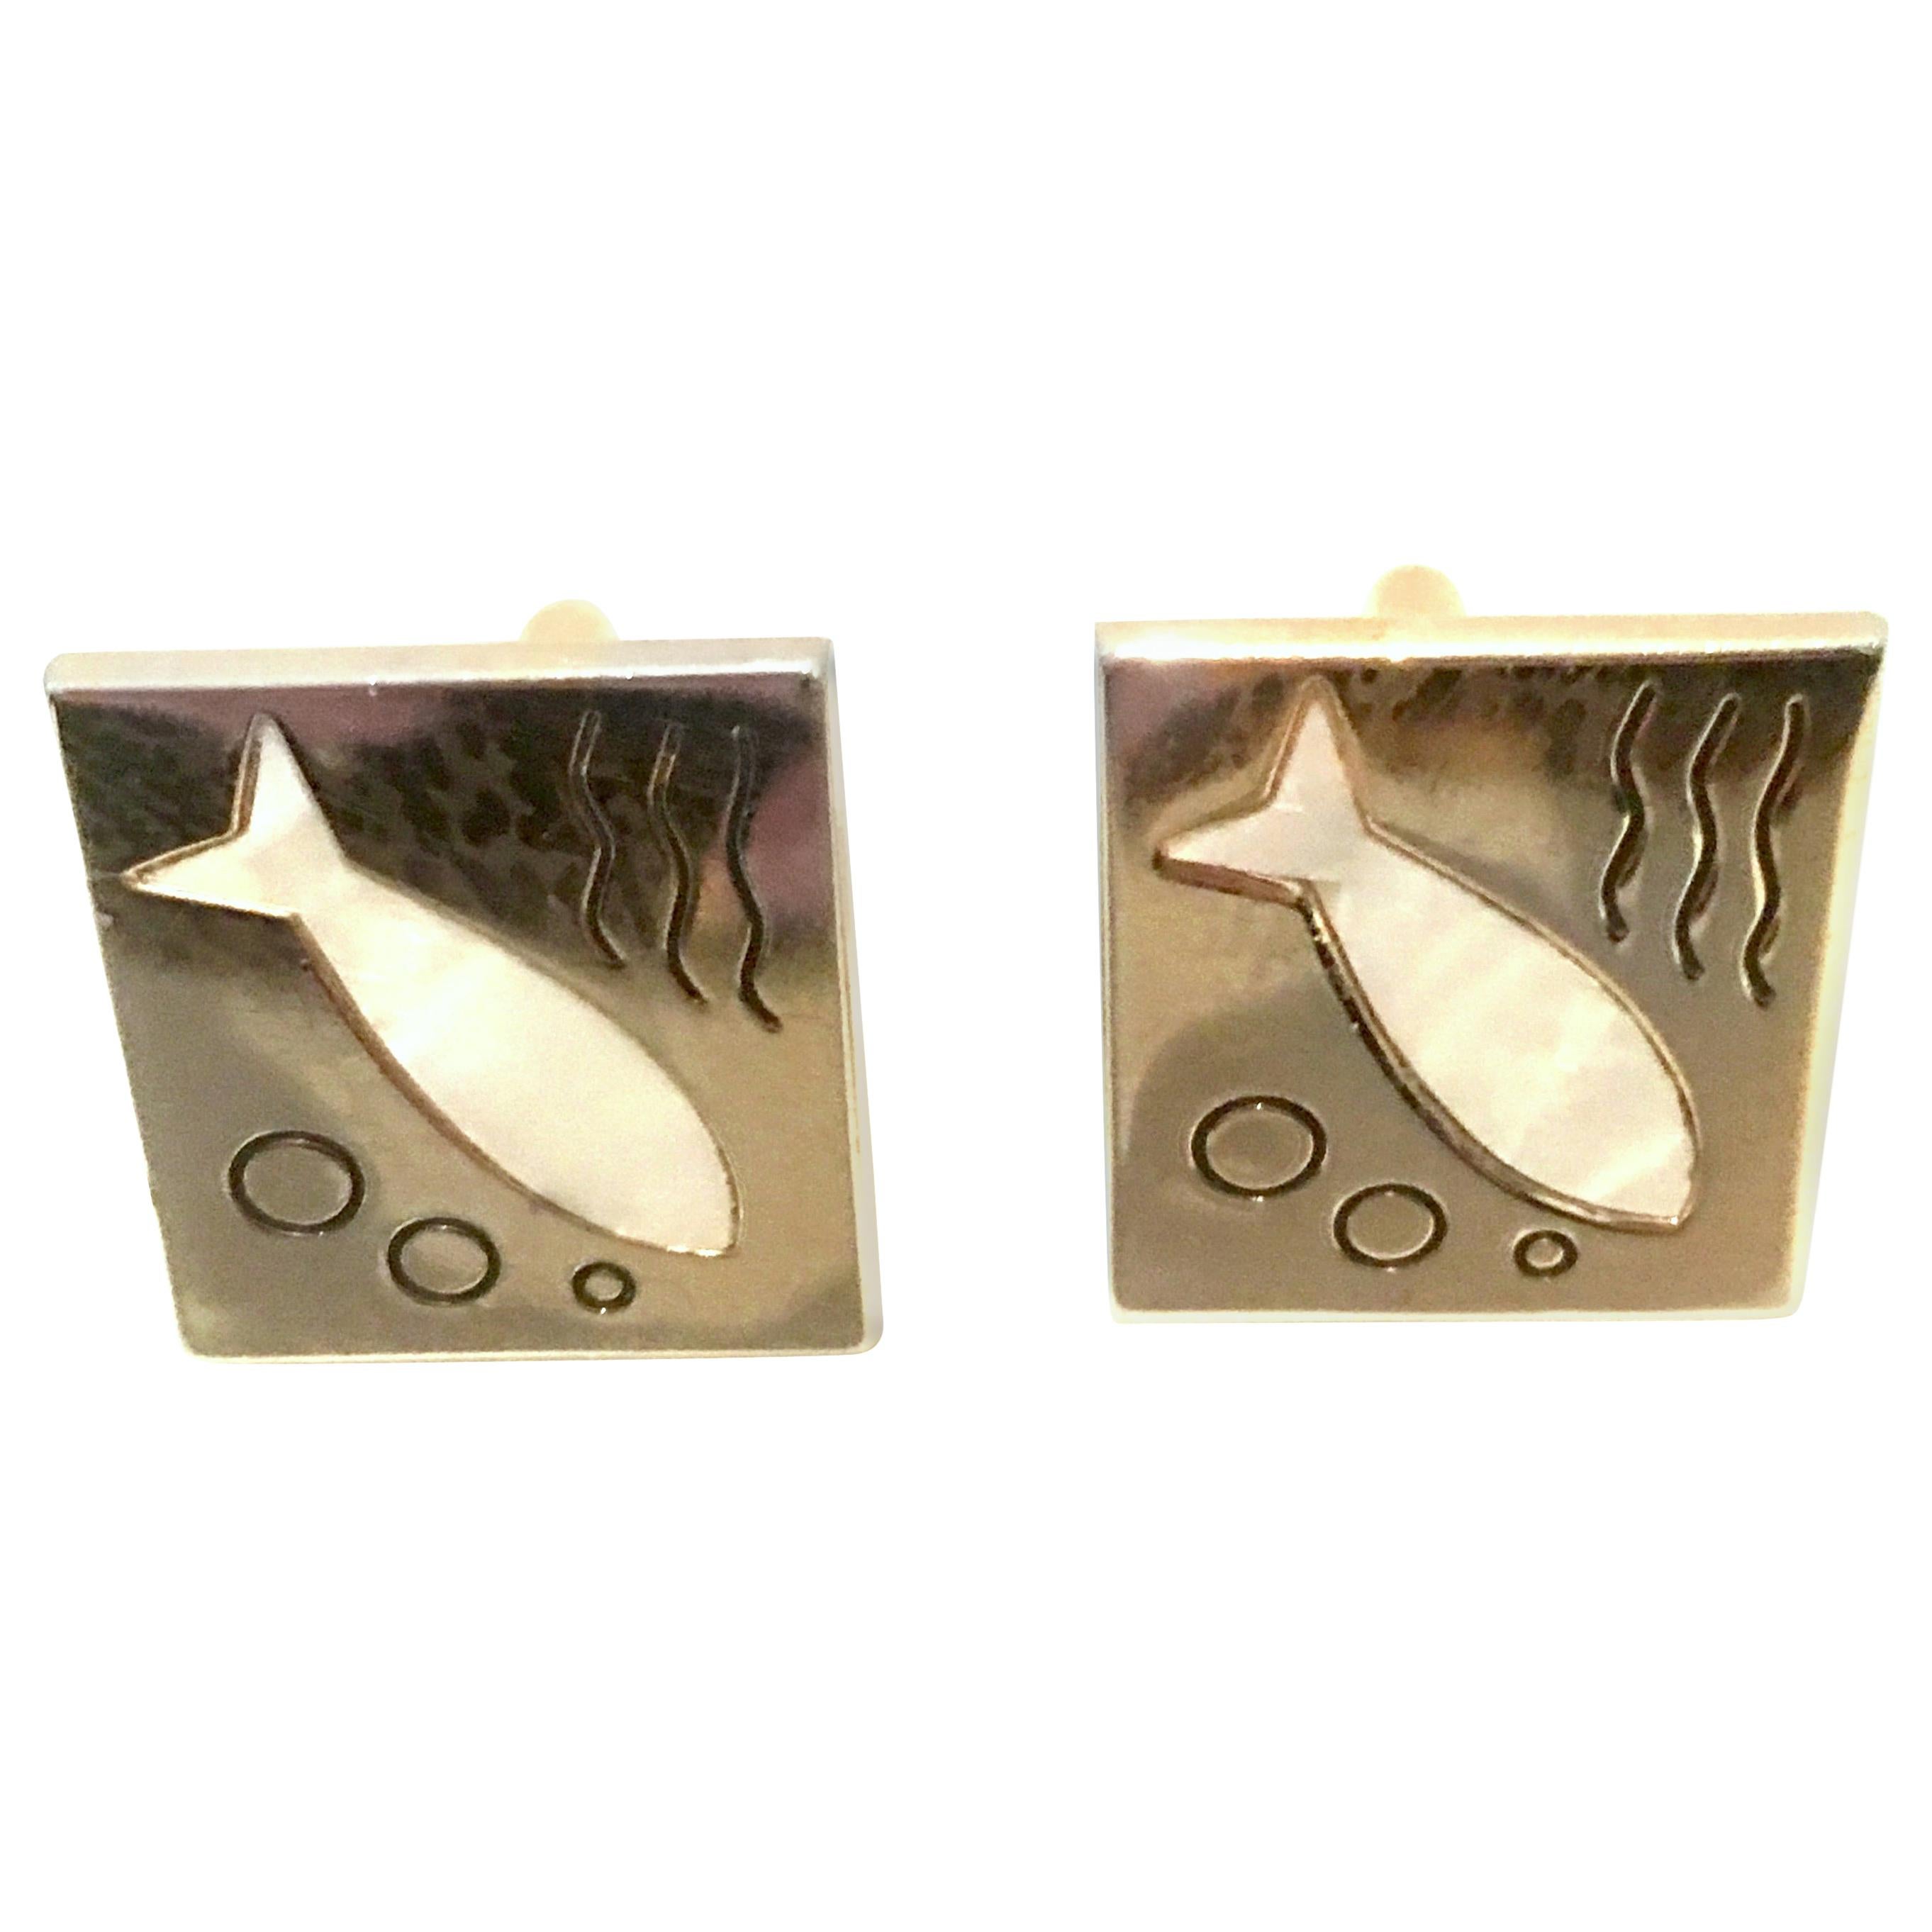 20th Century Pair Of Gold Plate & Mother Of Pearl "Fish" Cufflinks By, Swank